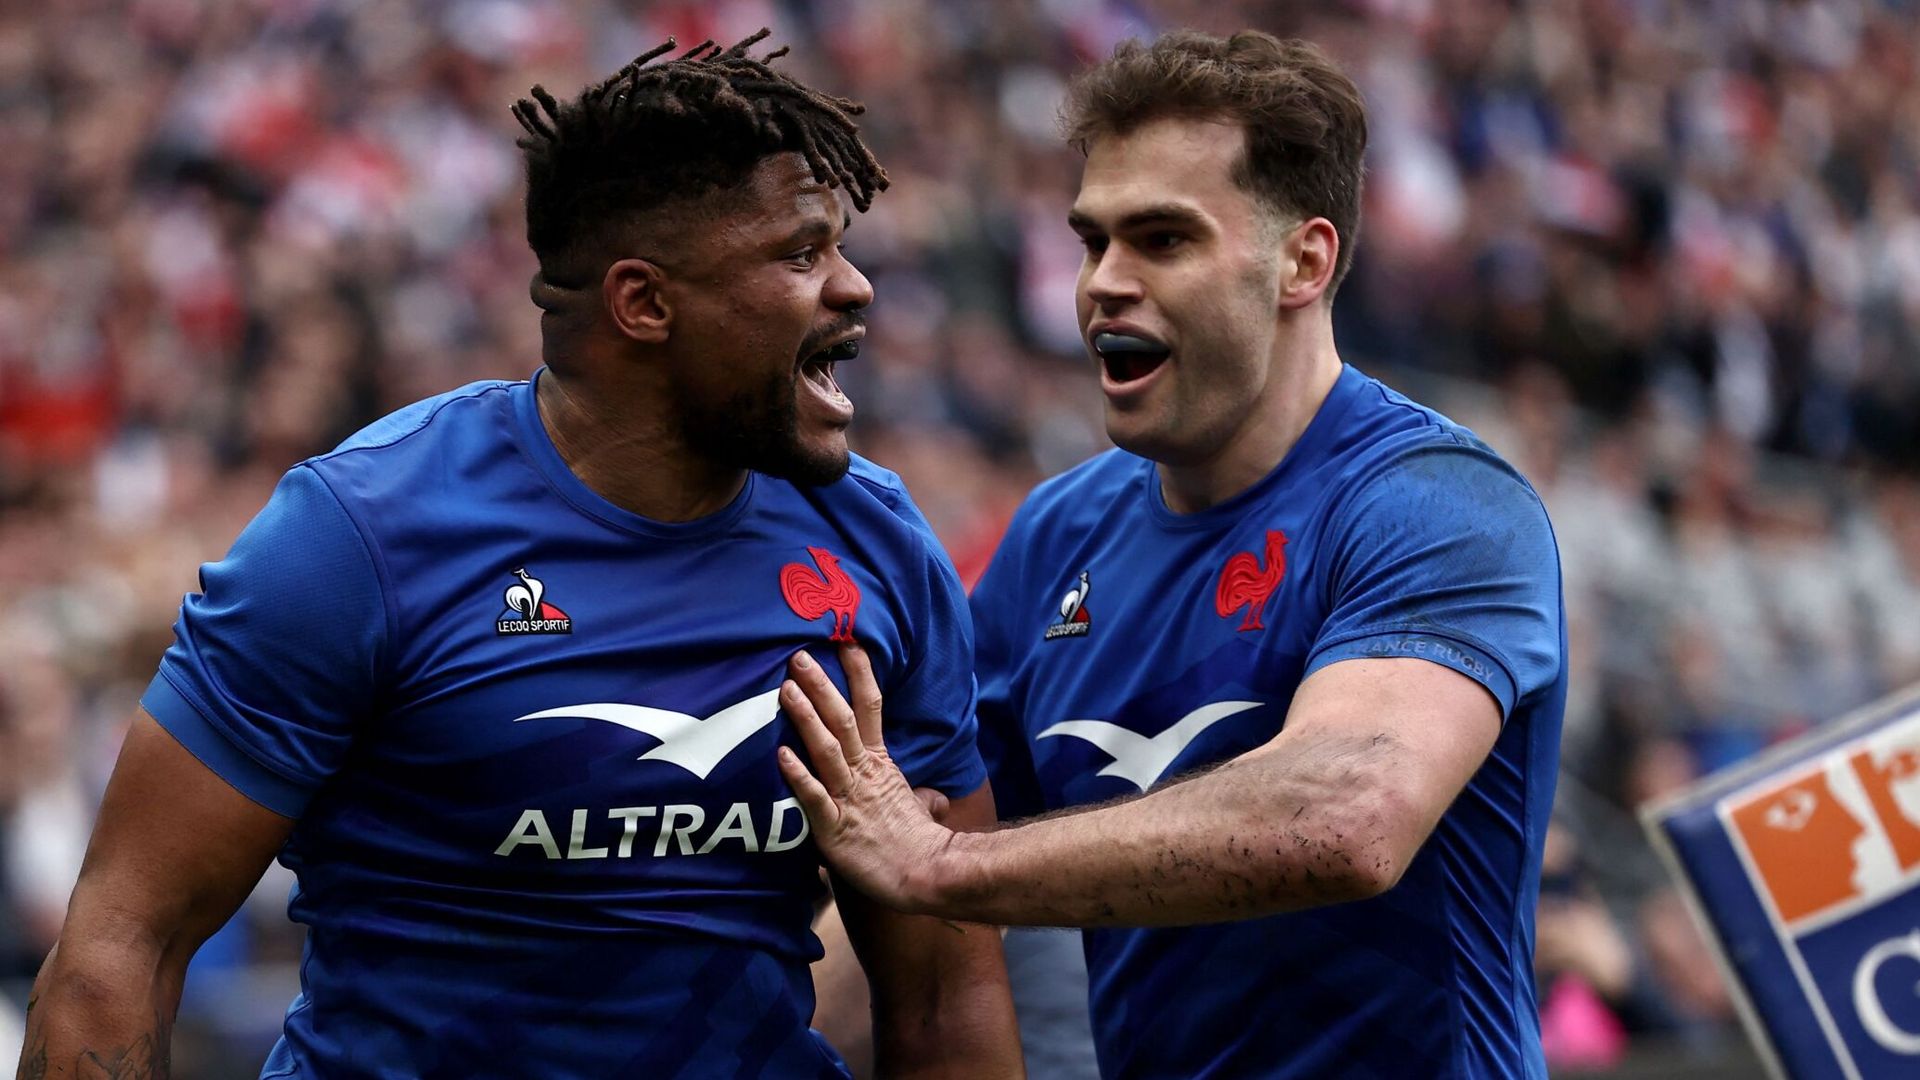 Six Nations: France stretch lead vs Wales in Paris LIVE!